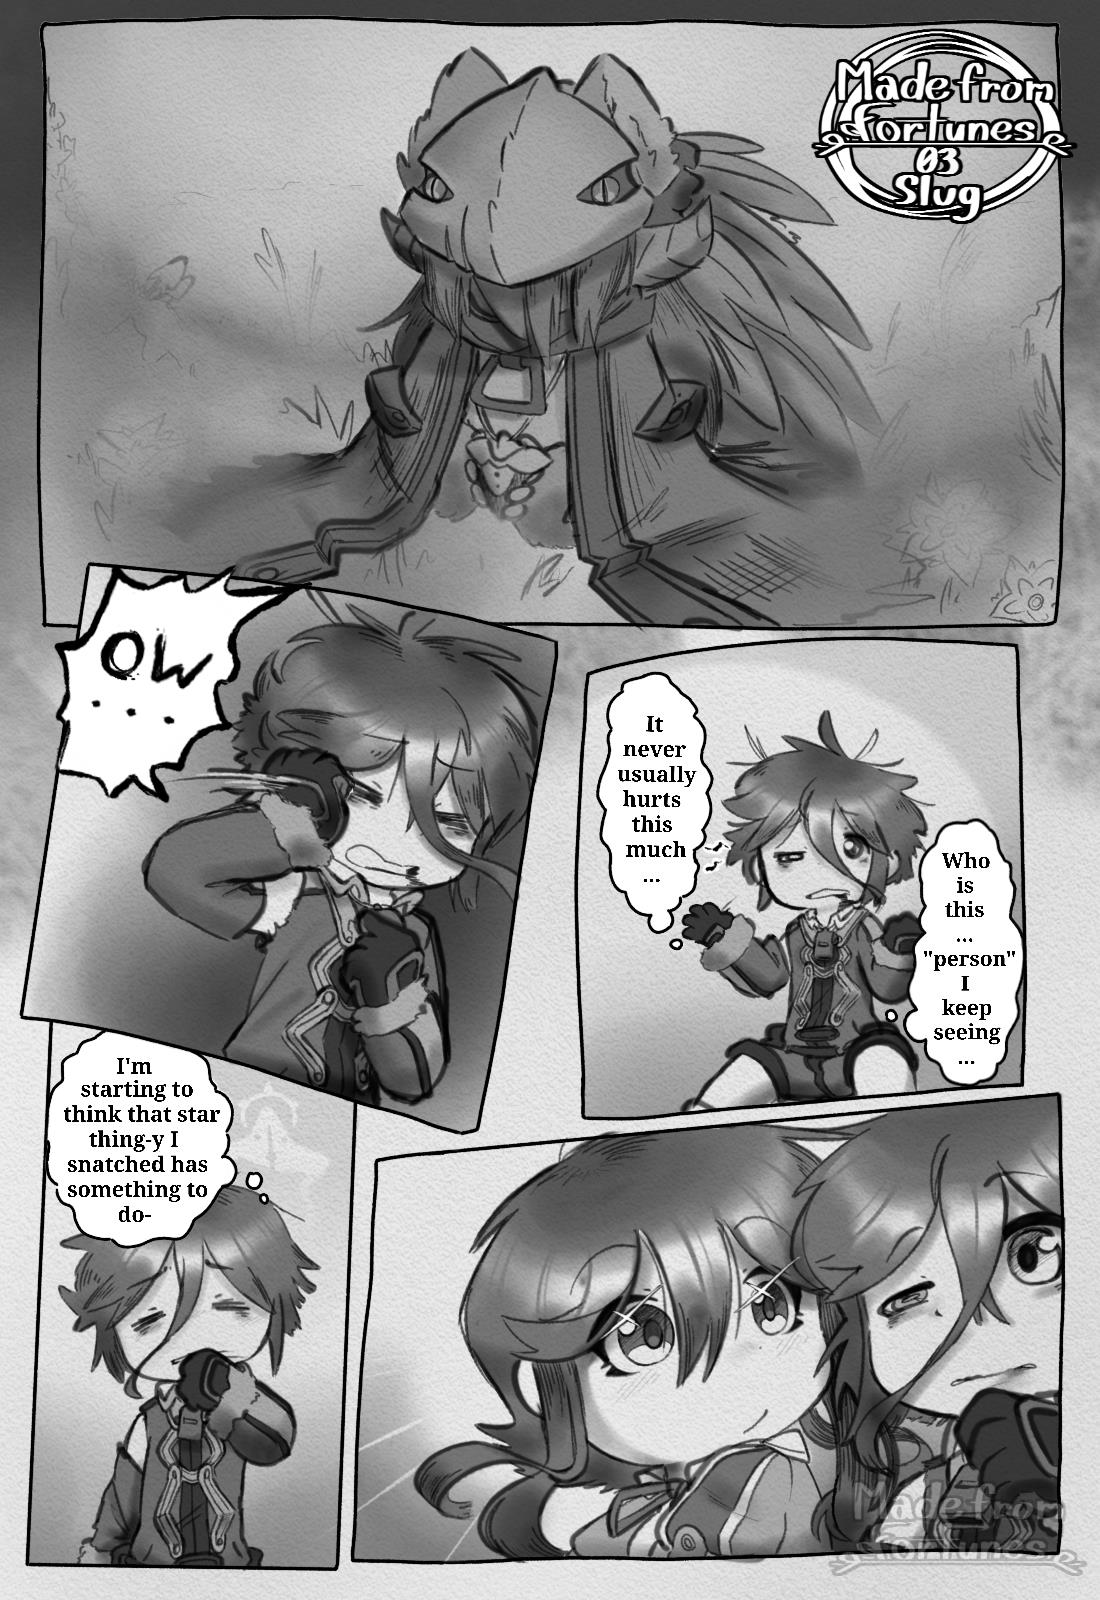 Made From Fortunes (Made In Abyss Fanmade Comic) Vol.1 Chapter 3: Slug - Picture 1